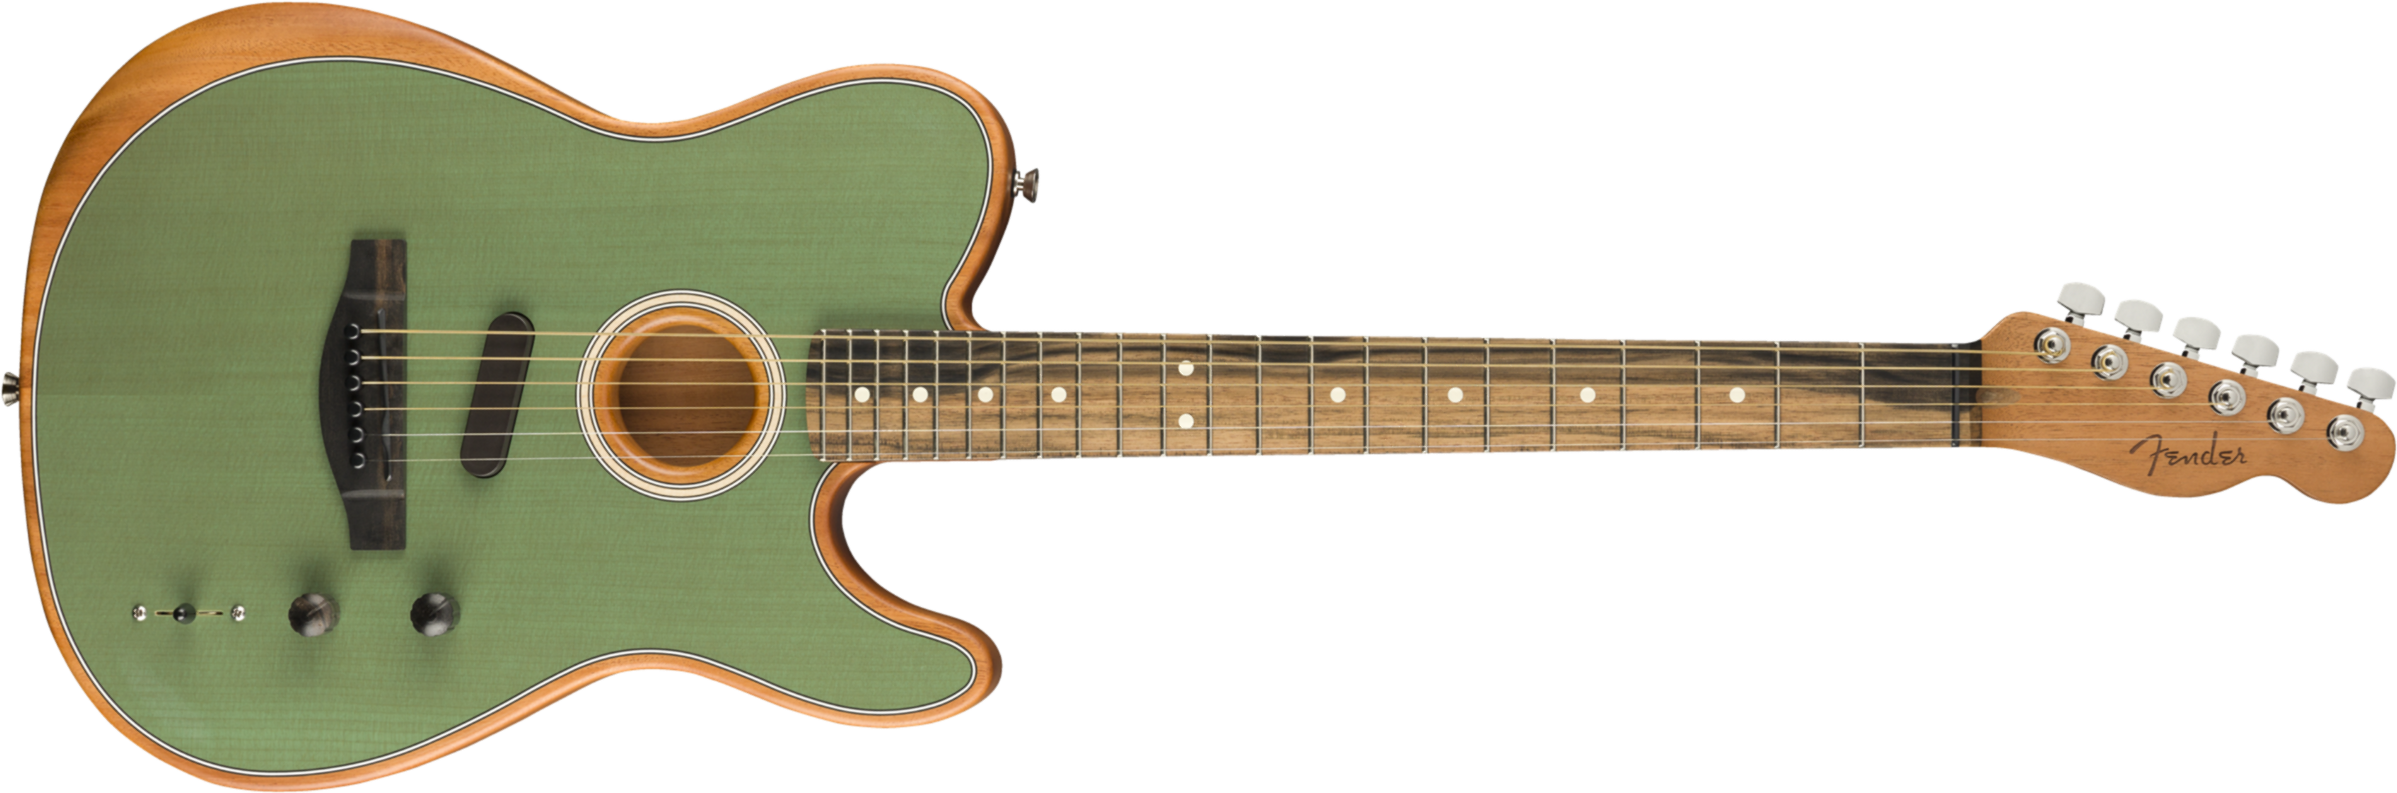 Fender Tele American Acoustasonic Usa Eb - Surf Green - Acoustic guitar & electro - Main picture